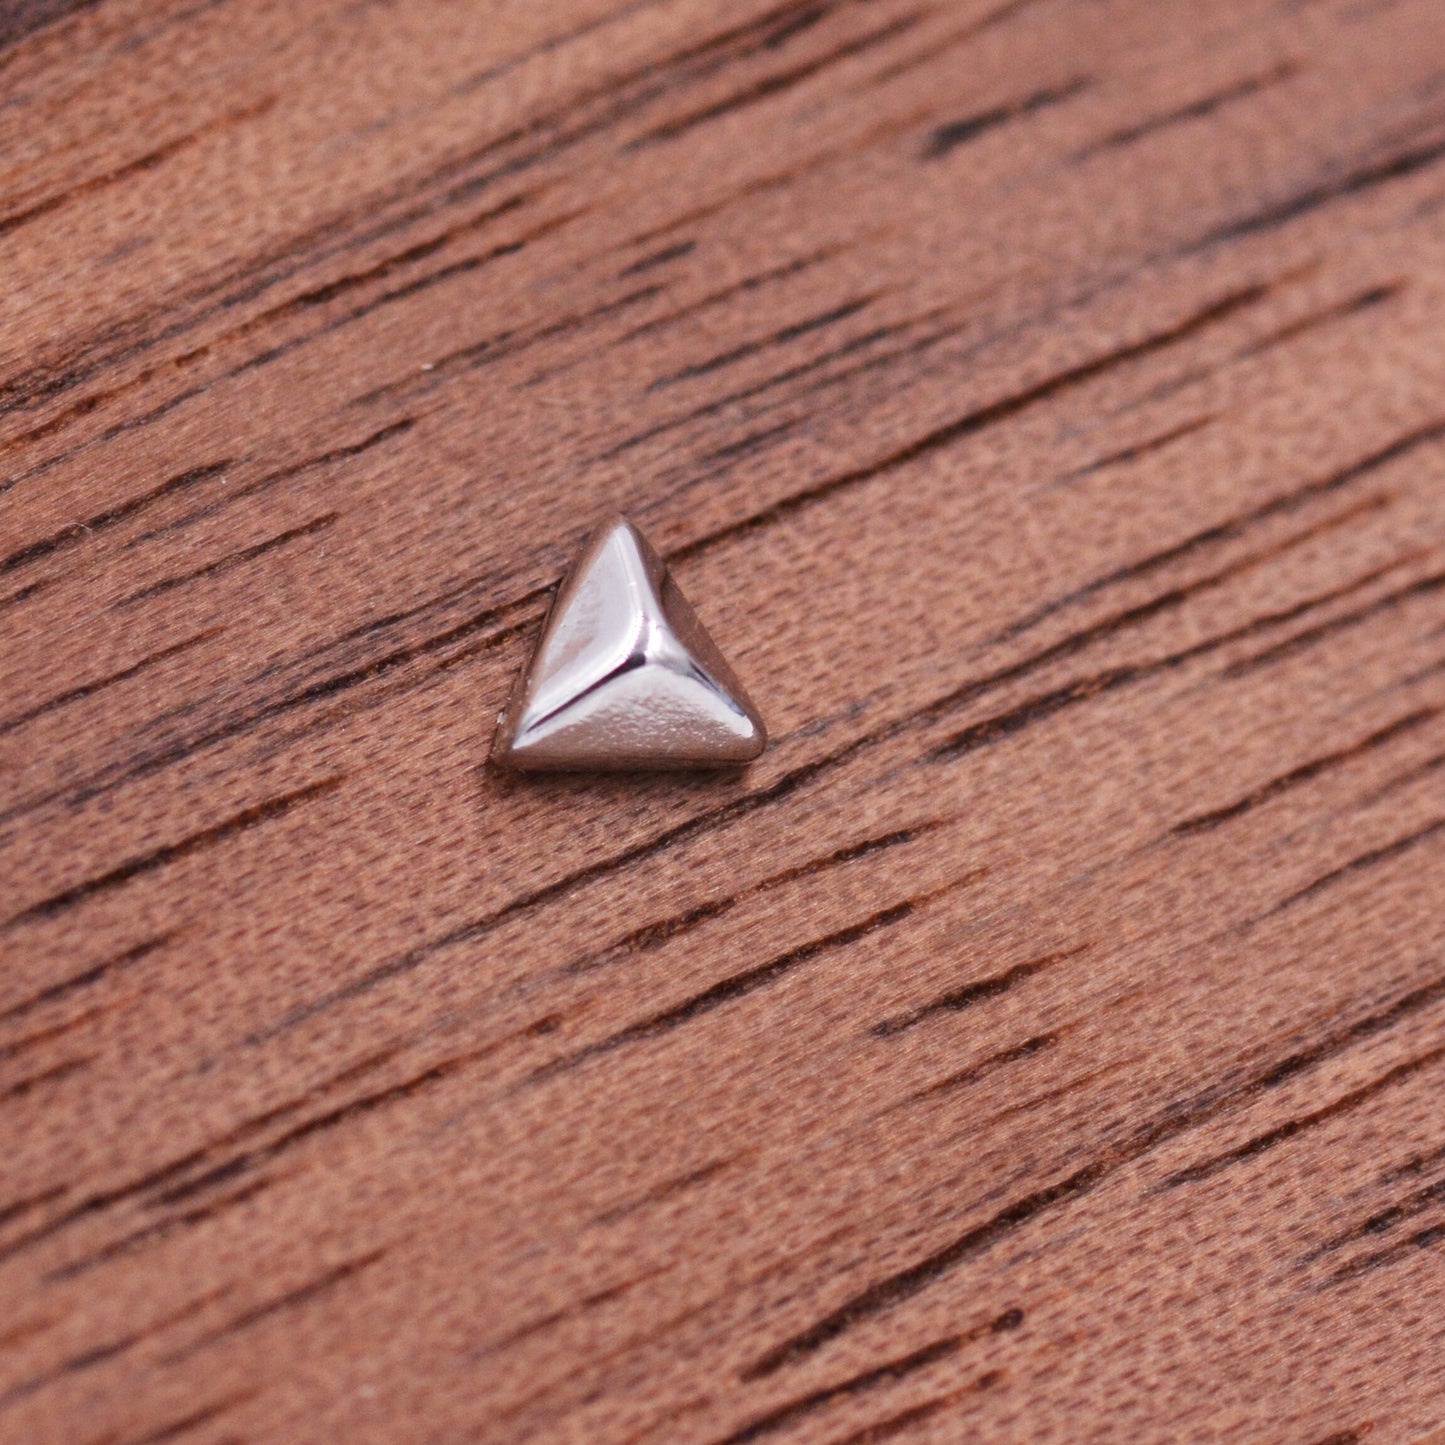 Extra Tiny Pyramid Spike Stud Earrings in Sterling Silver, Teeny Weeny Triangle Stud, Silver or Gold